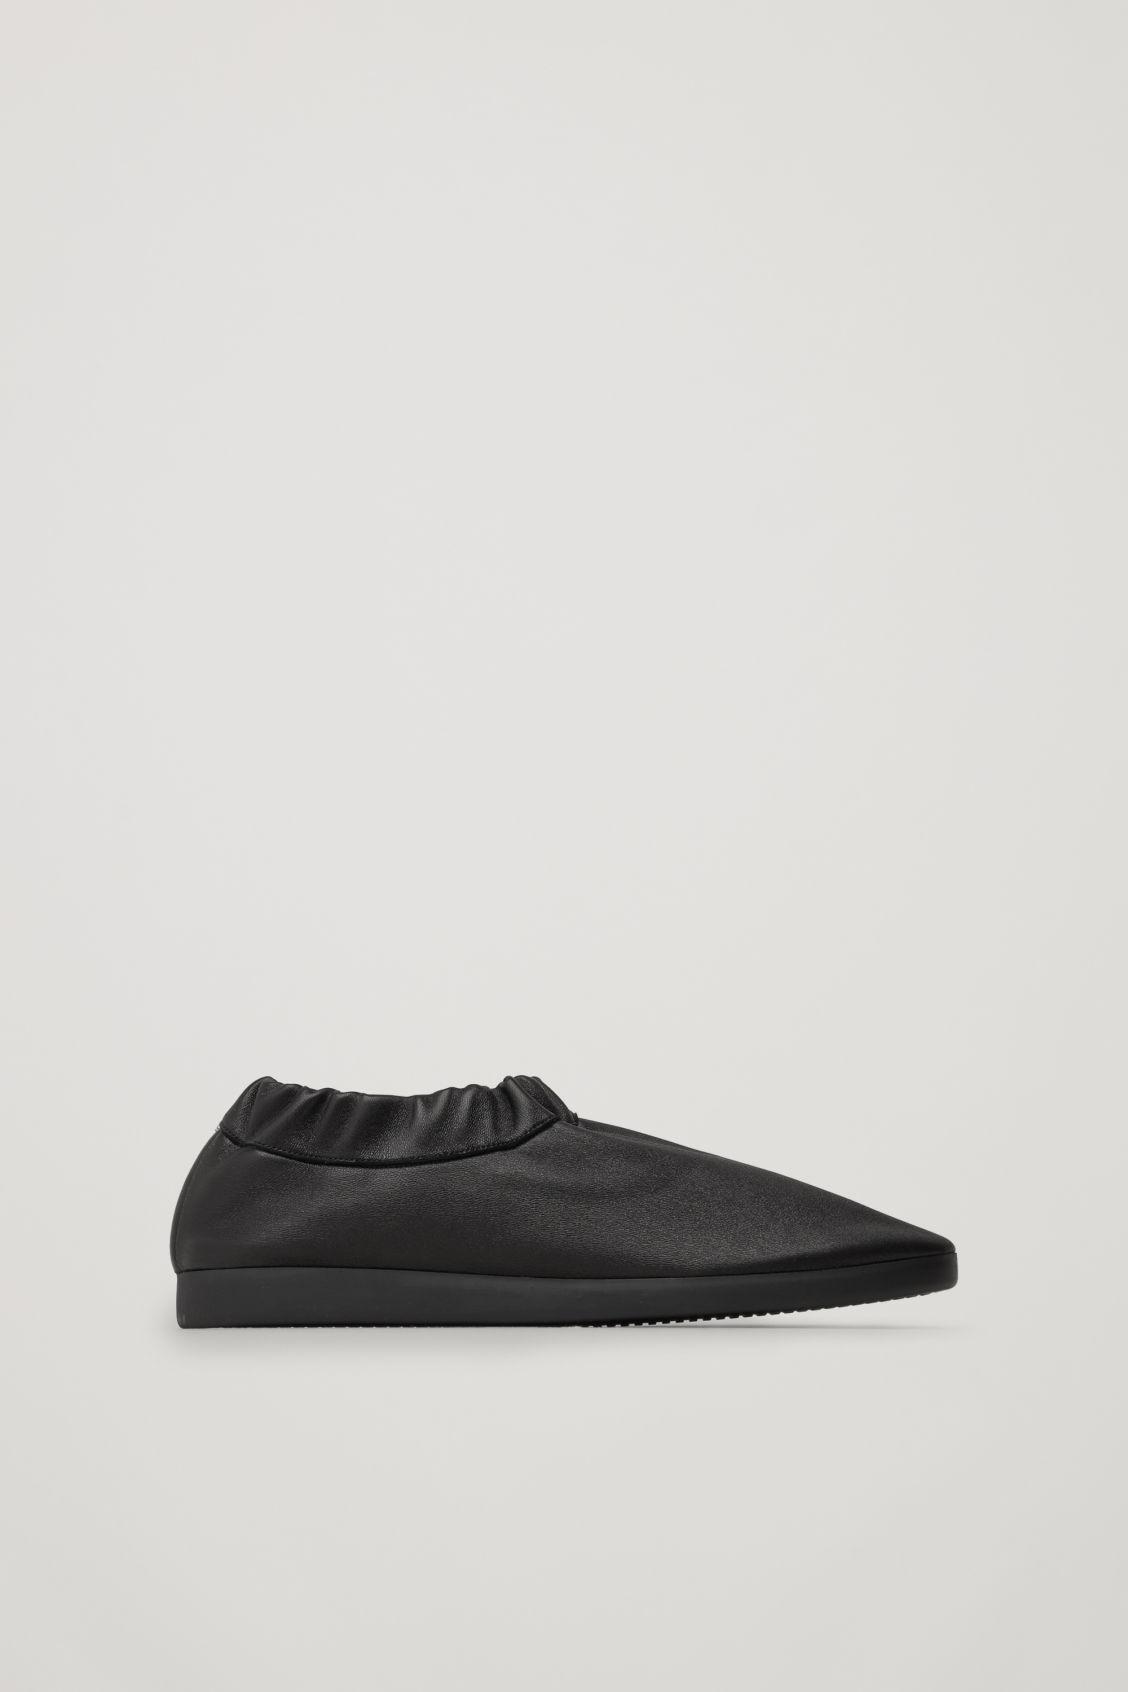 slip on leather shoes cos